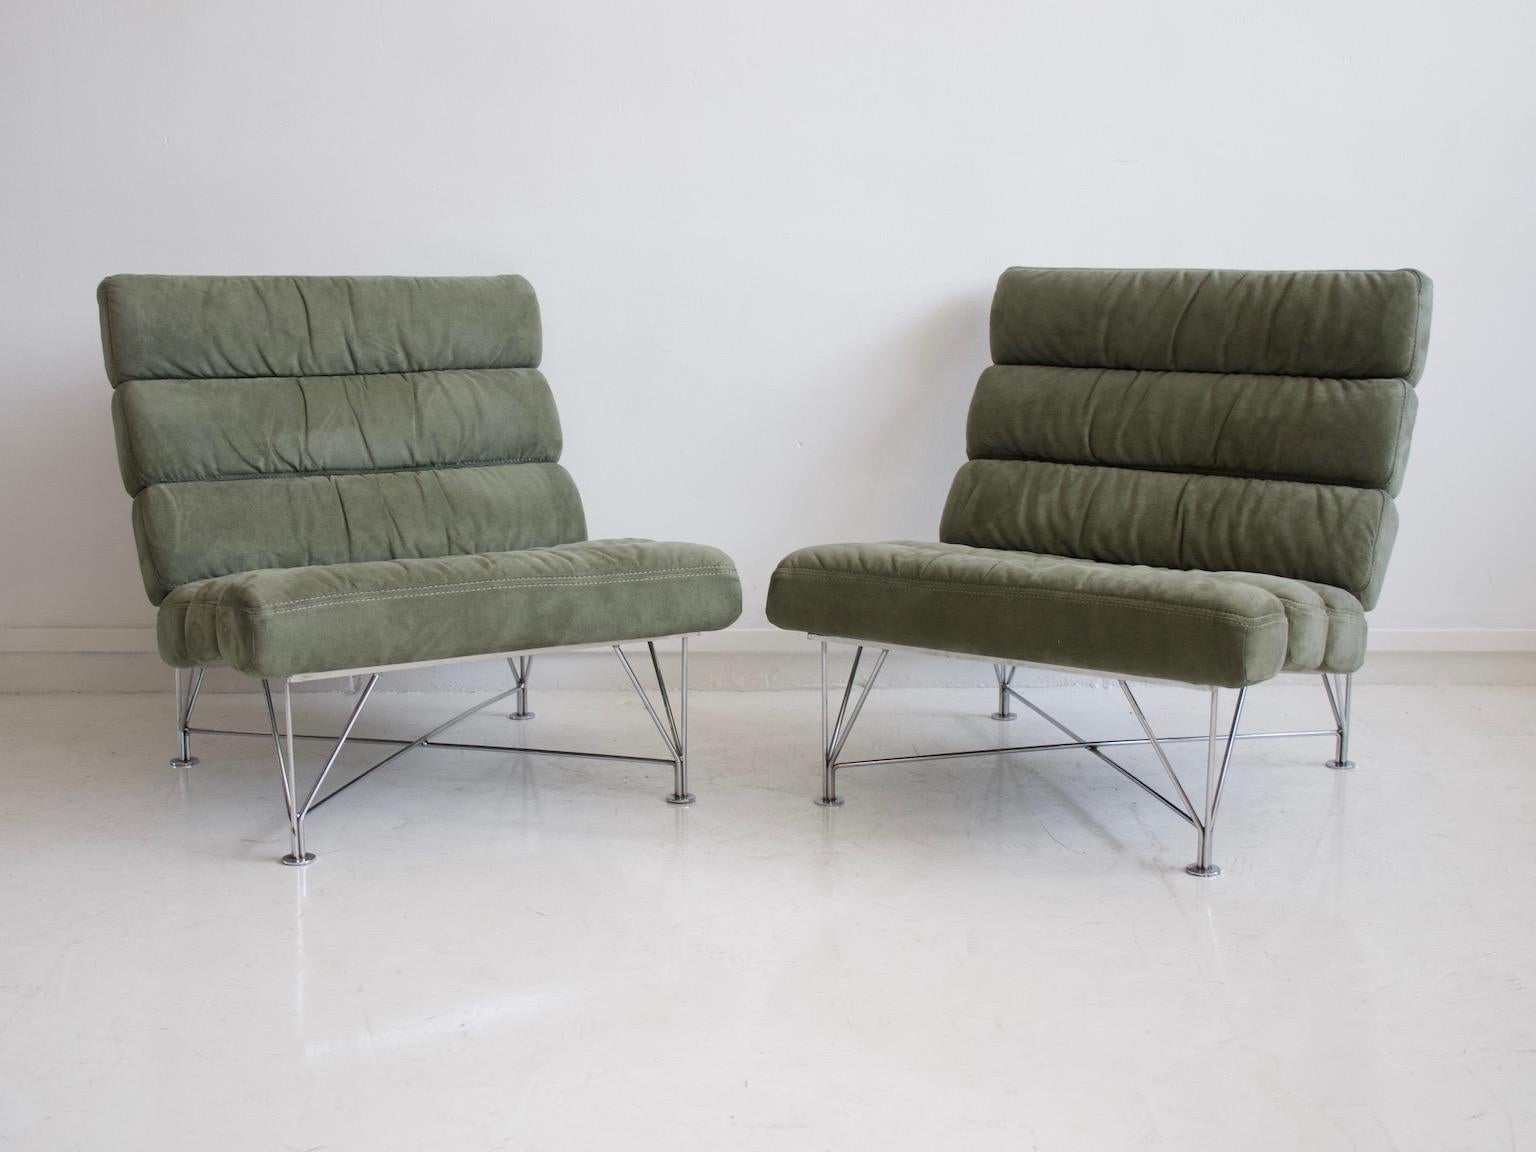 Pair of Green Lounge Chairs with Steel Frame by DUX Design Team In Good Condition For Sale In Madrid, ES